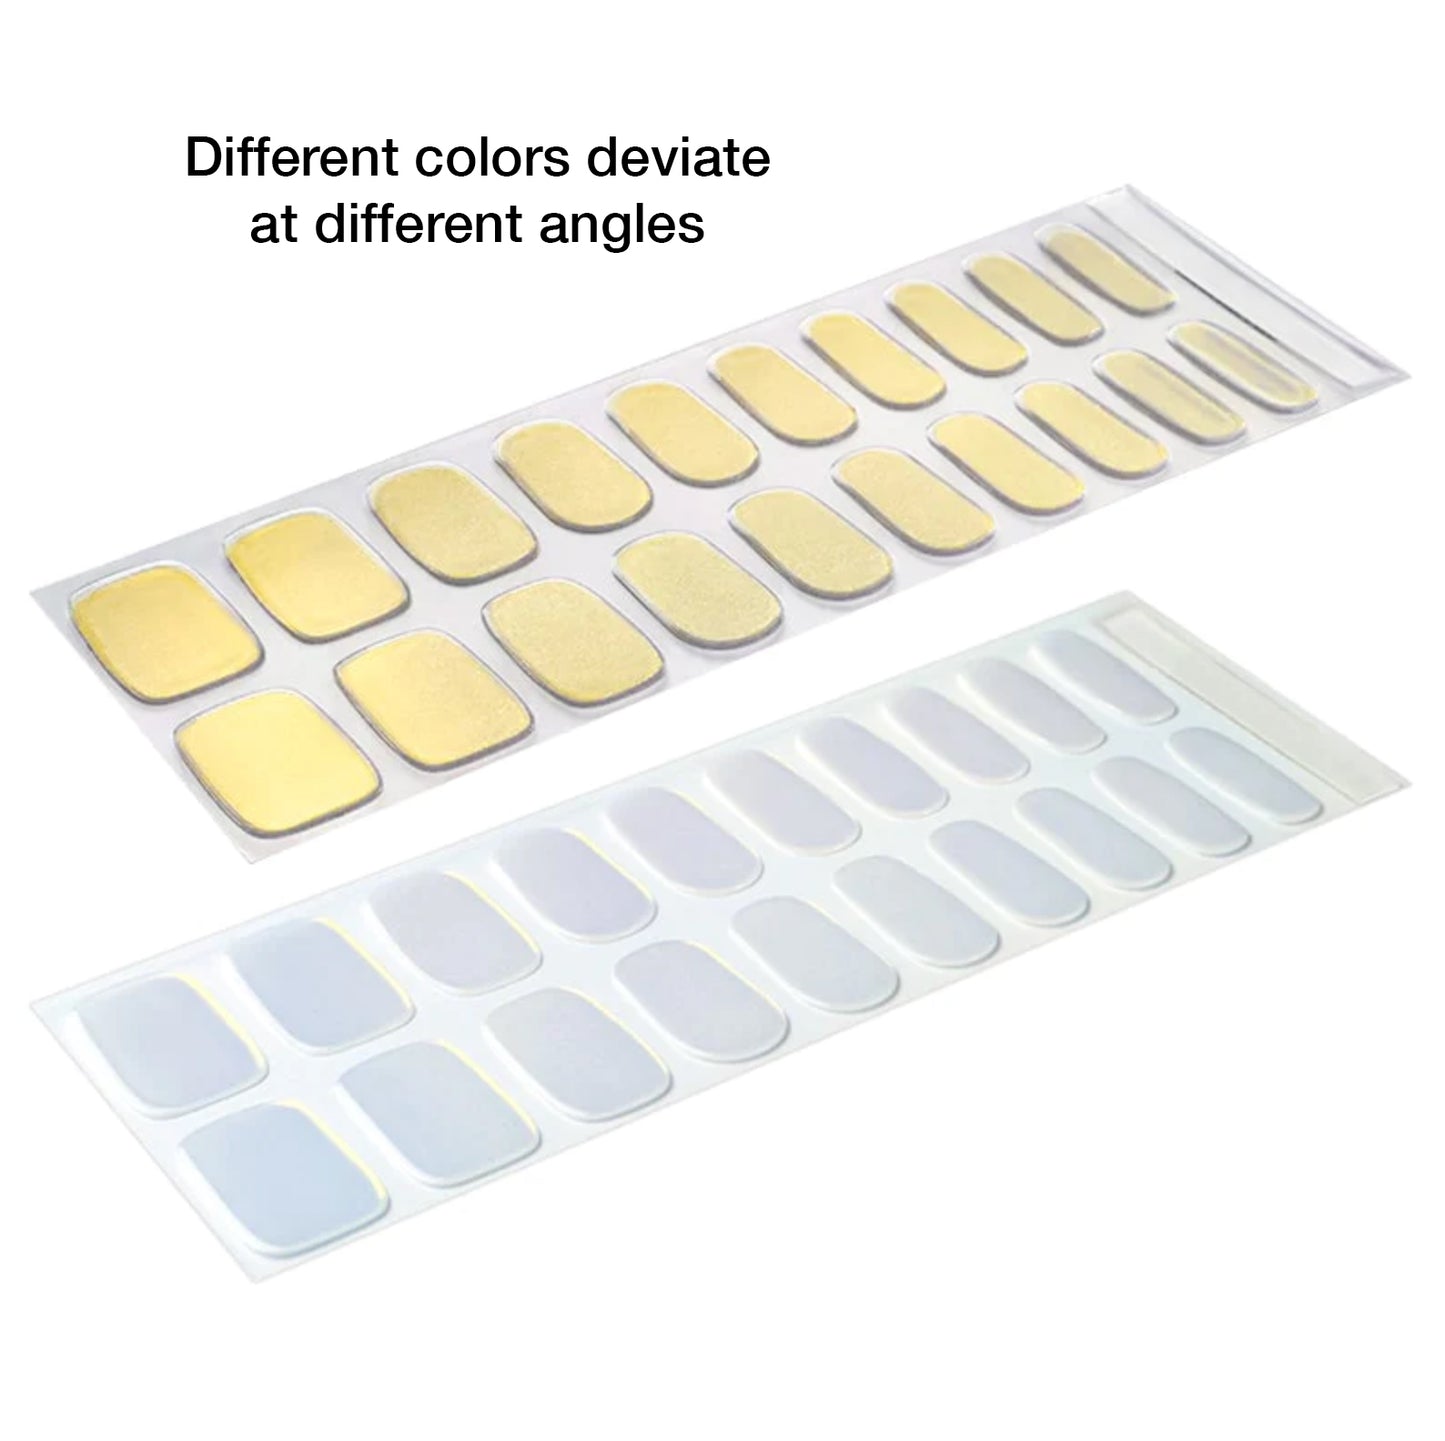 LIGHT BLUE YELLOW PEARLESCENT - SEMI-CURED GEL NAIL STICKERS 20 STRIPS